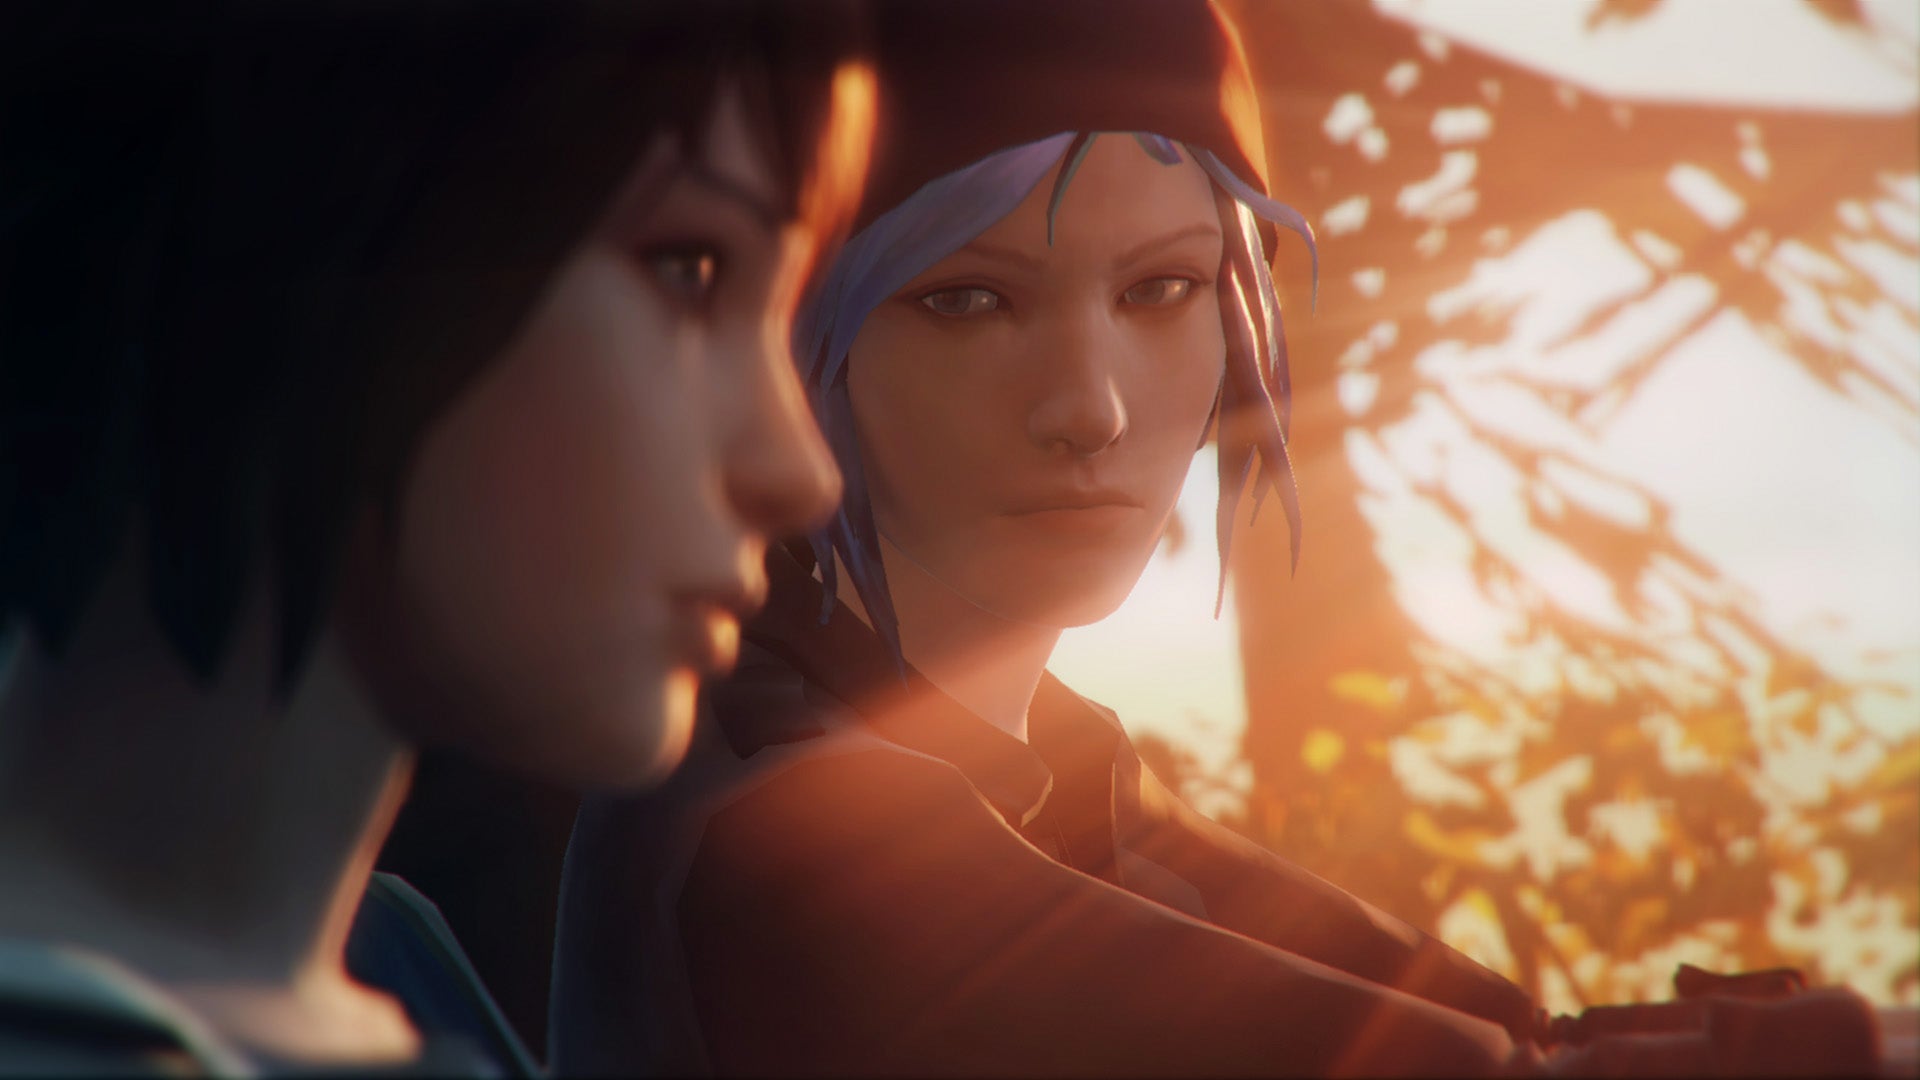 Image for Legendary Digital Studios is turning Life is Strange into a live-action series